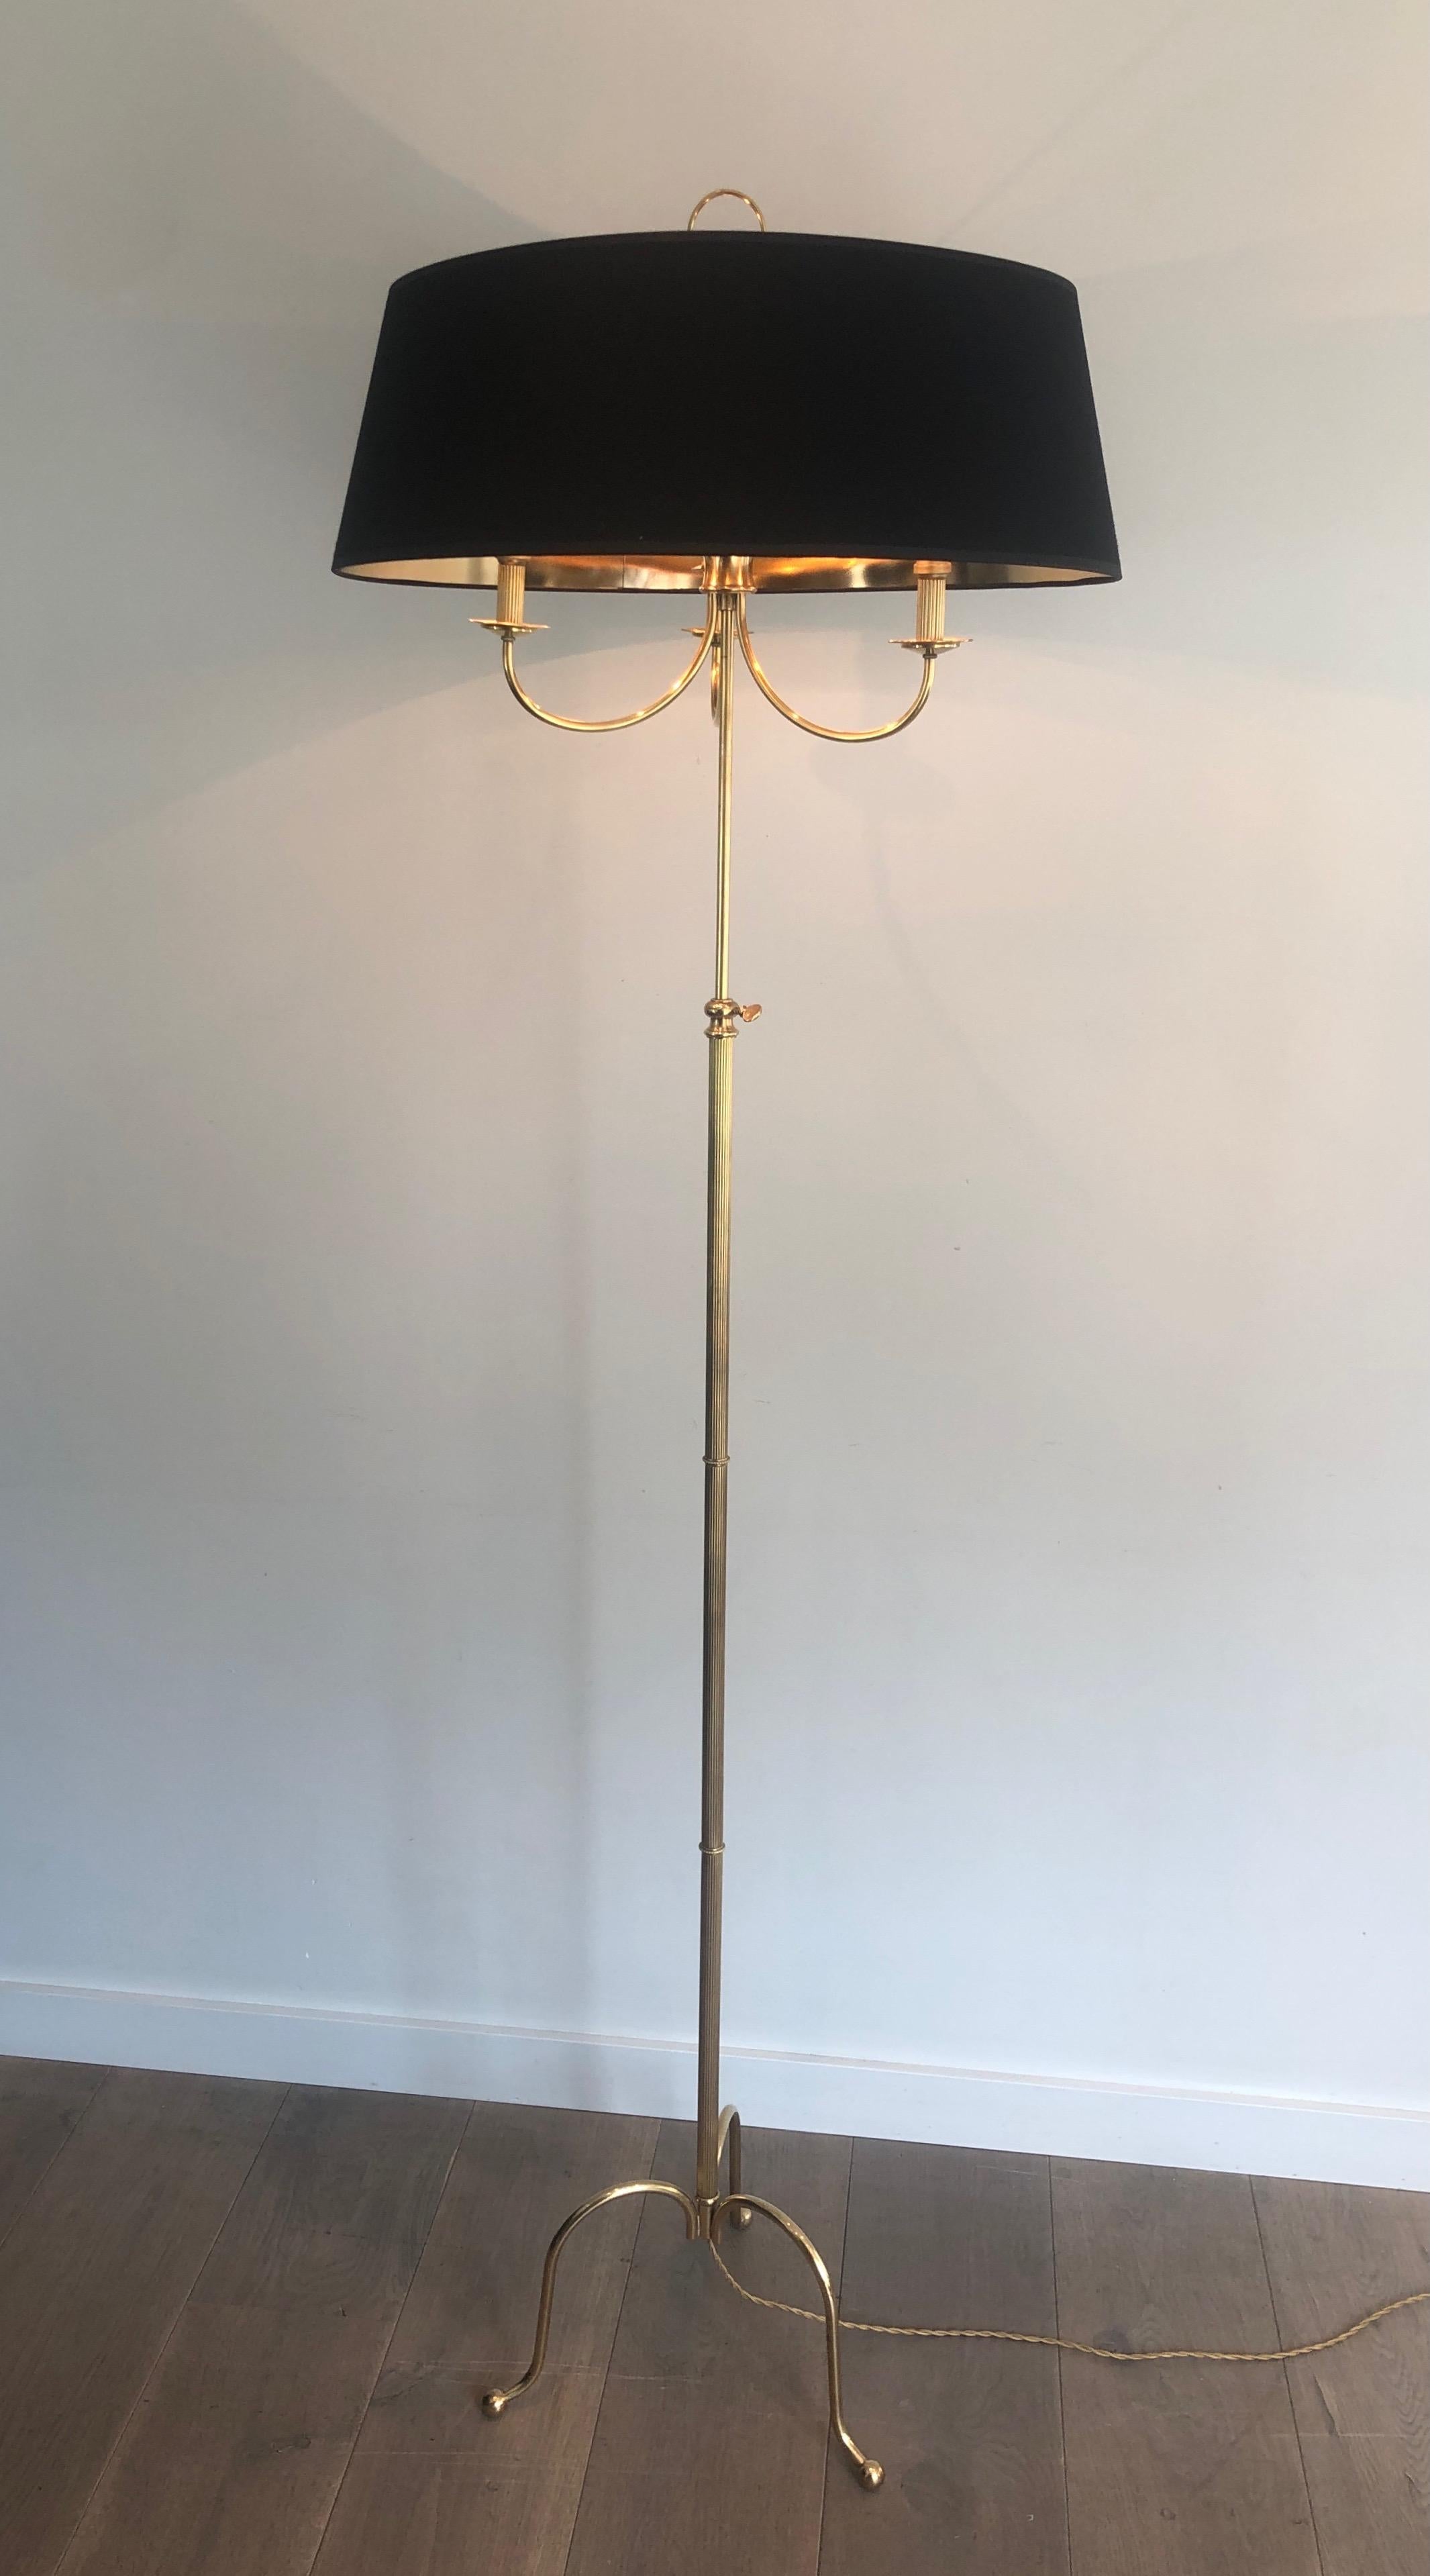 This neoclassical style floor lamp is made of brass. It has 3 arms and is adjustable. This is a French work in the style of Maison Jansen, circa 1940.